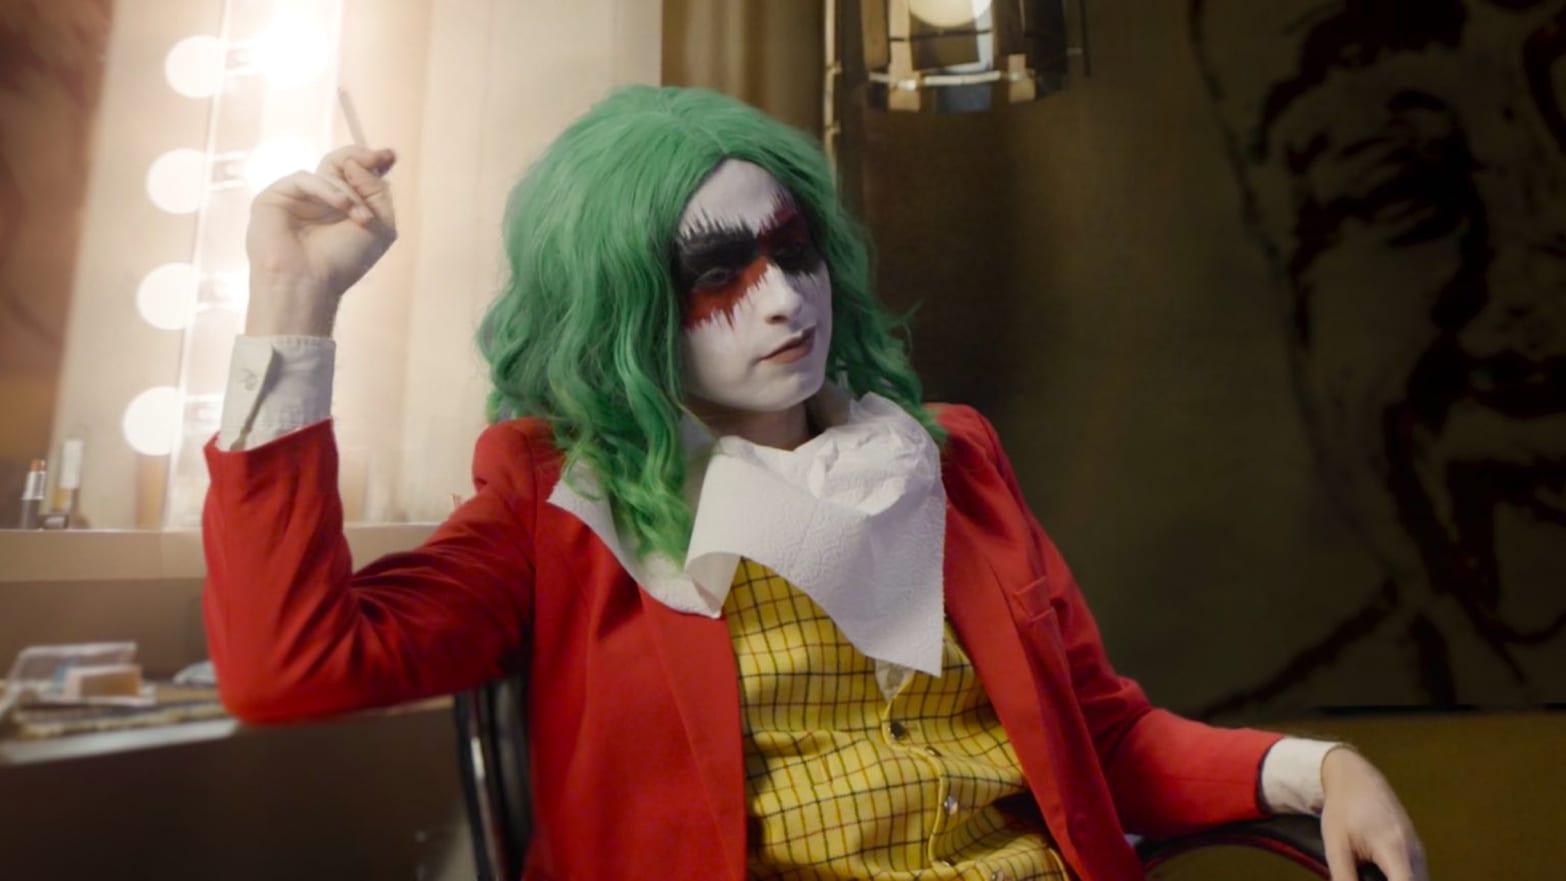 The Peoples Joker Is a Trippy Movie That Turns the Joker Into a Trans Origin Story